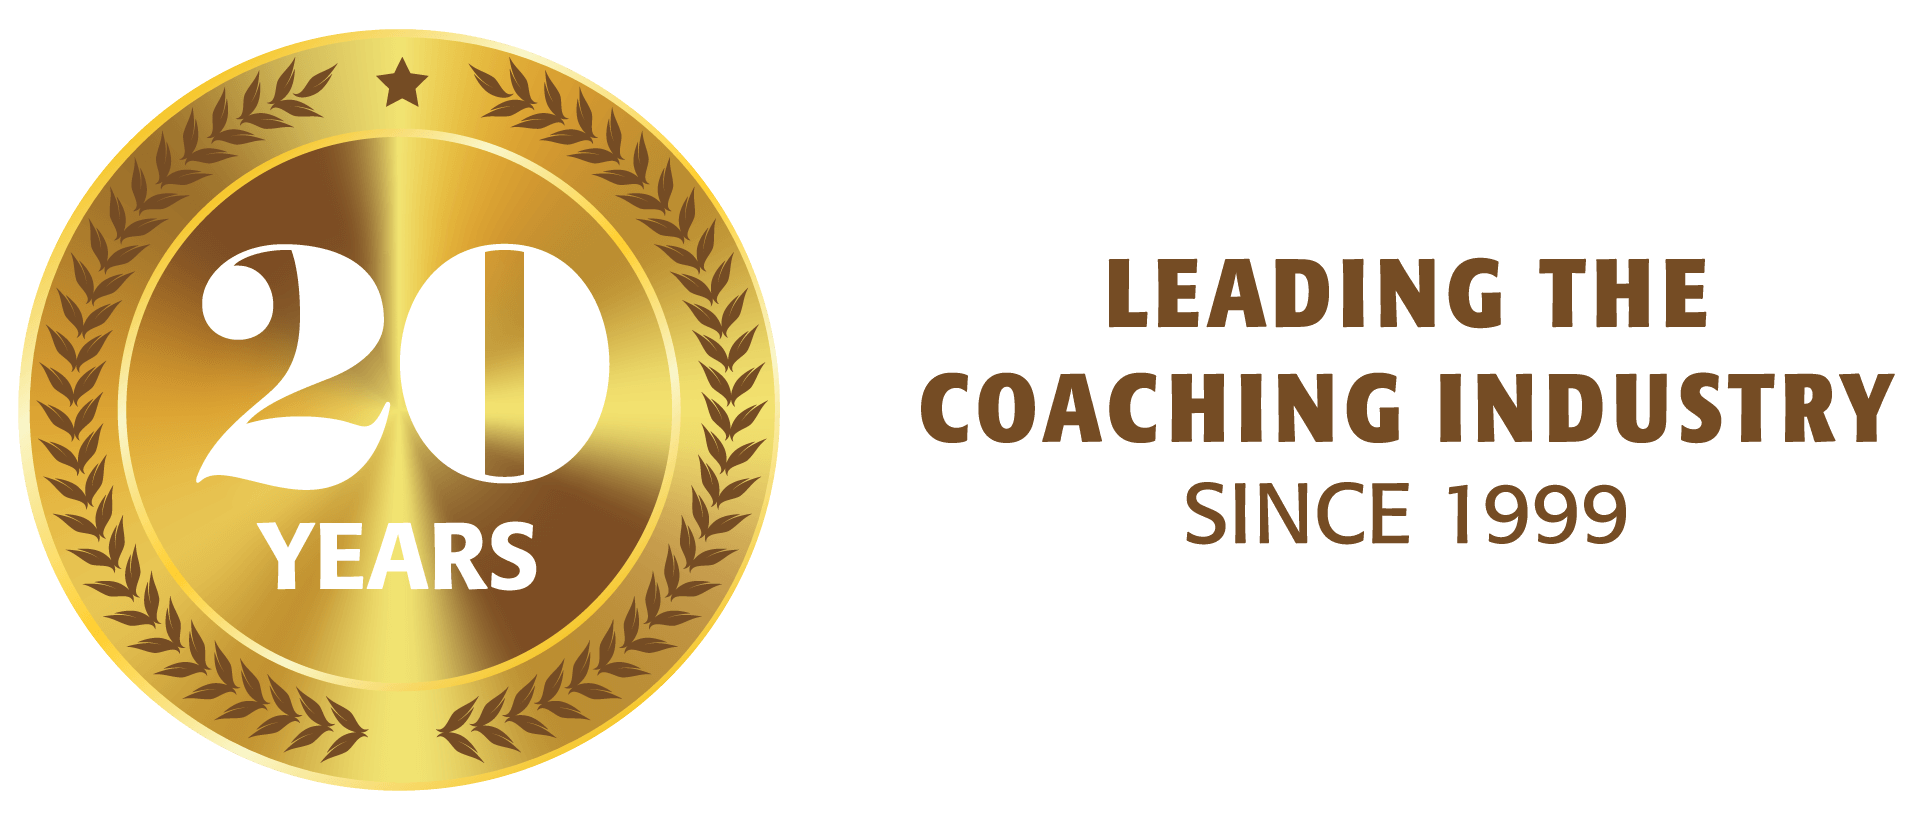 Leading the coaching industry for 20 years image